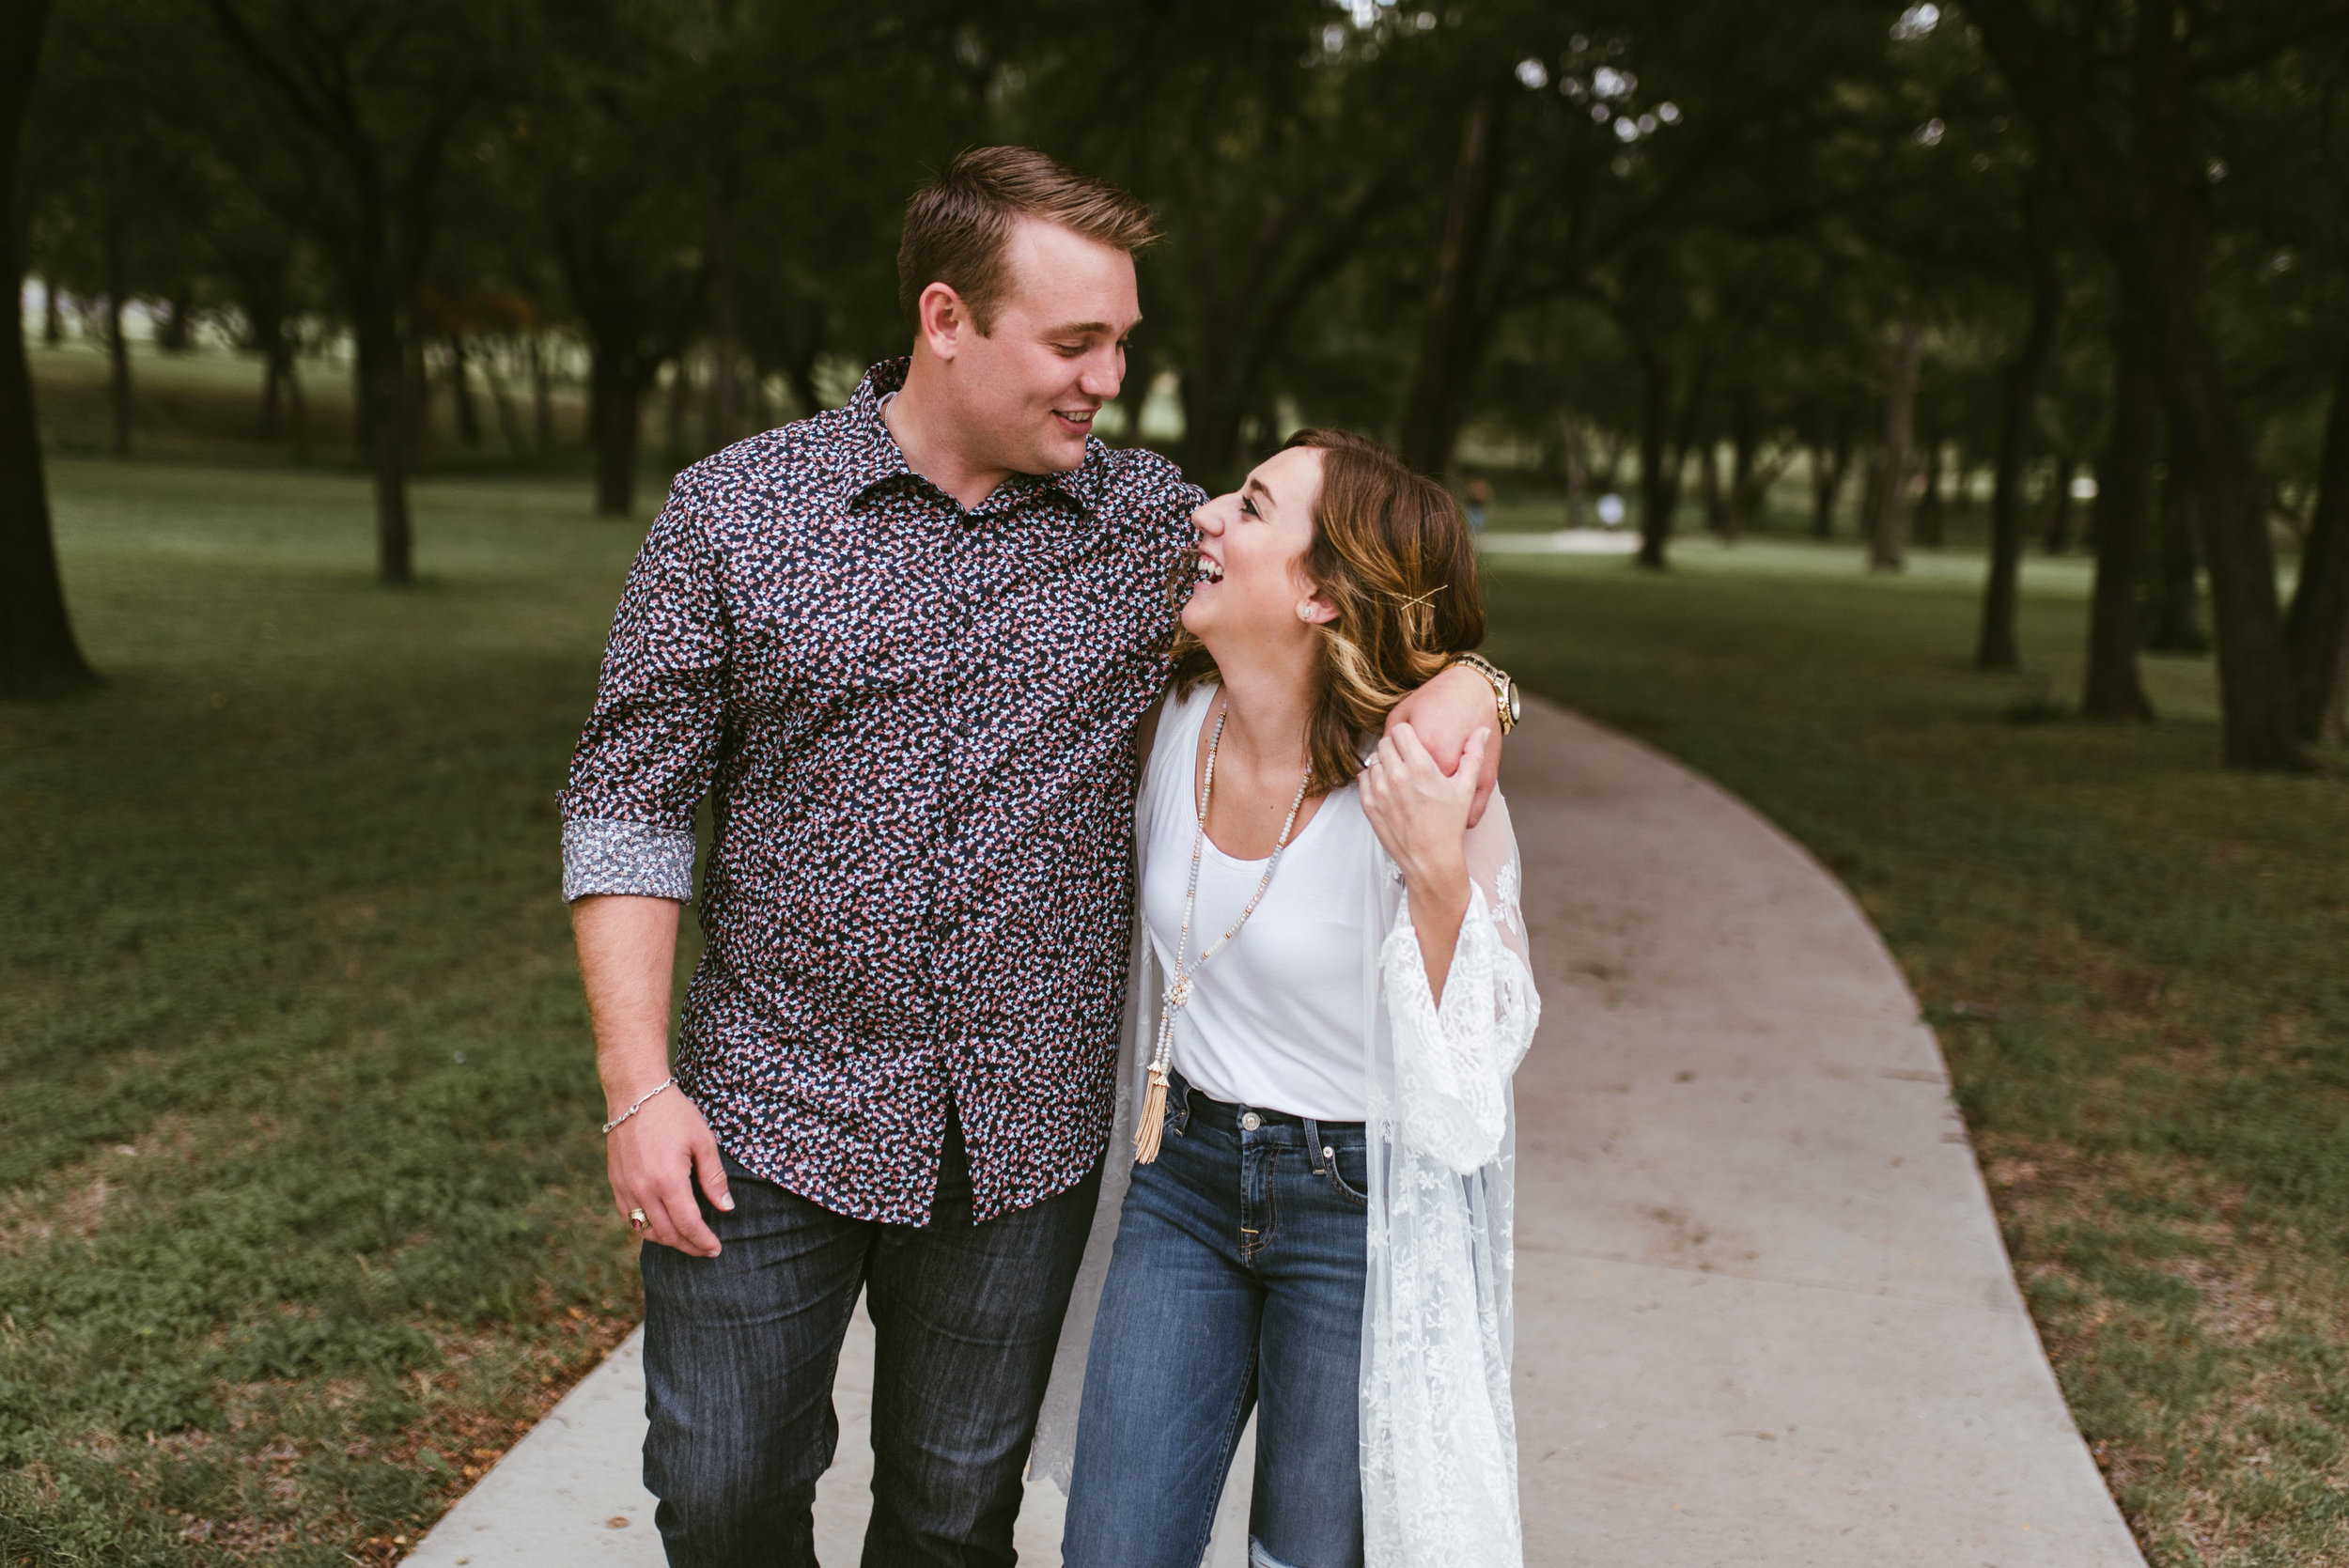  Fort Worth Engagement Session | Laura+Tyler | Fort Worth Engagement Photographer | www.jordanmitchellphotography.com   